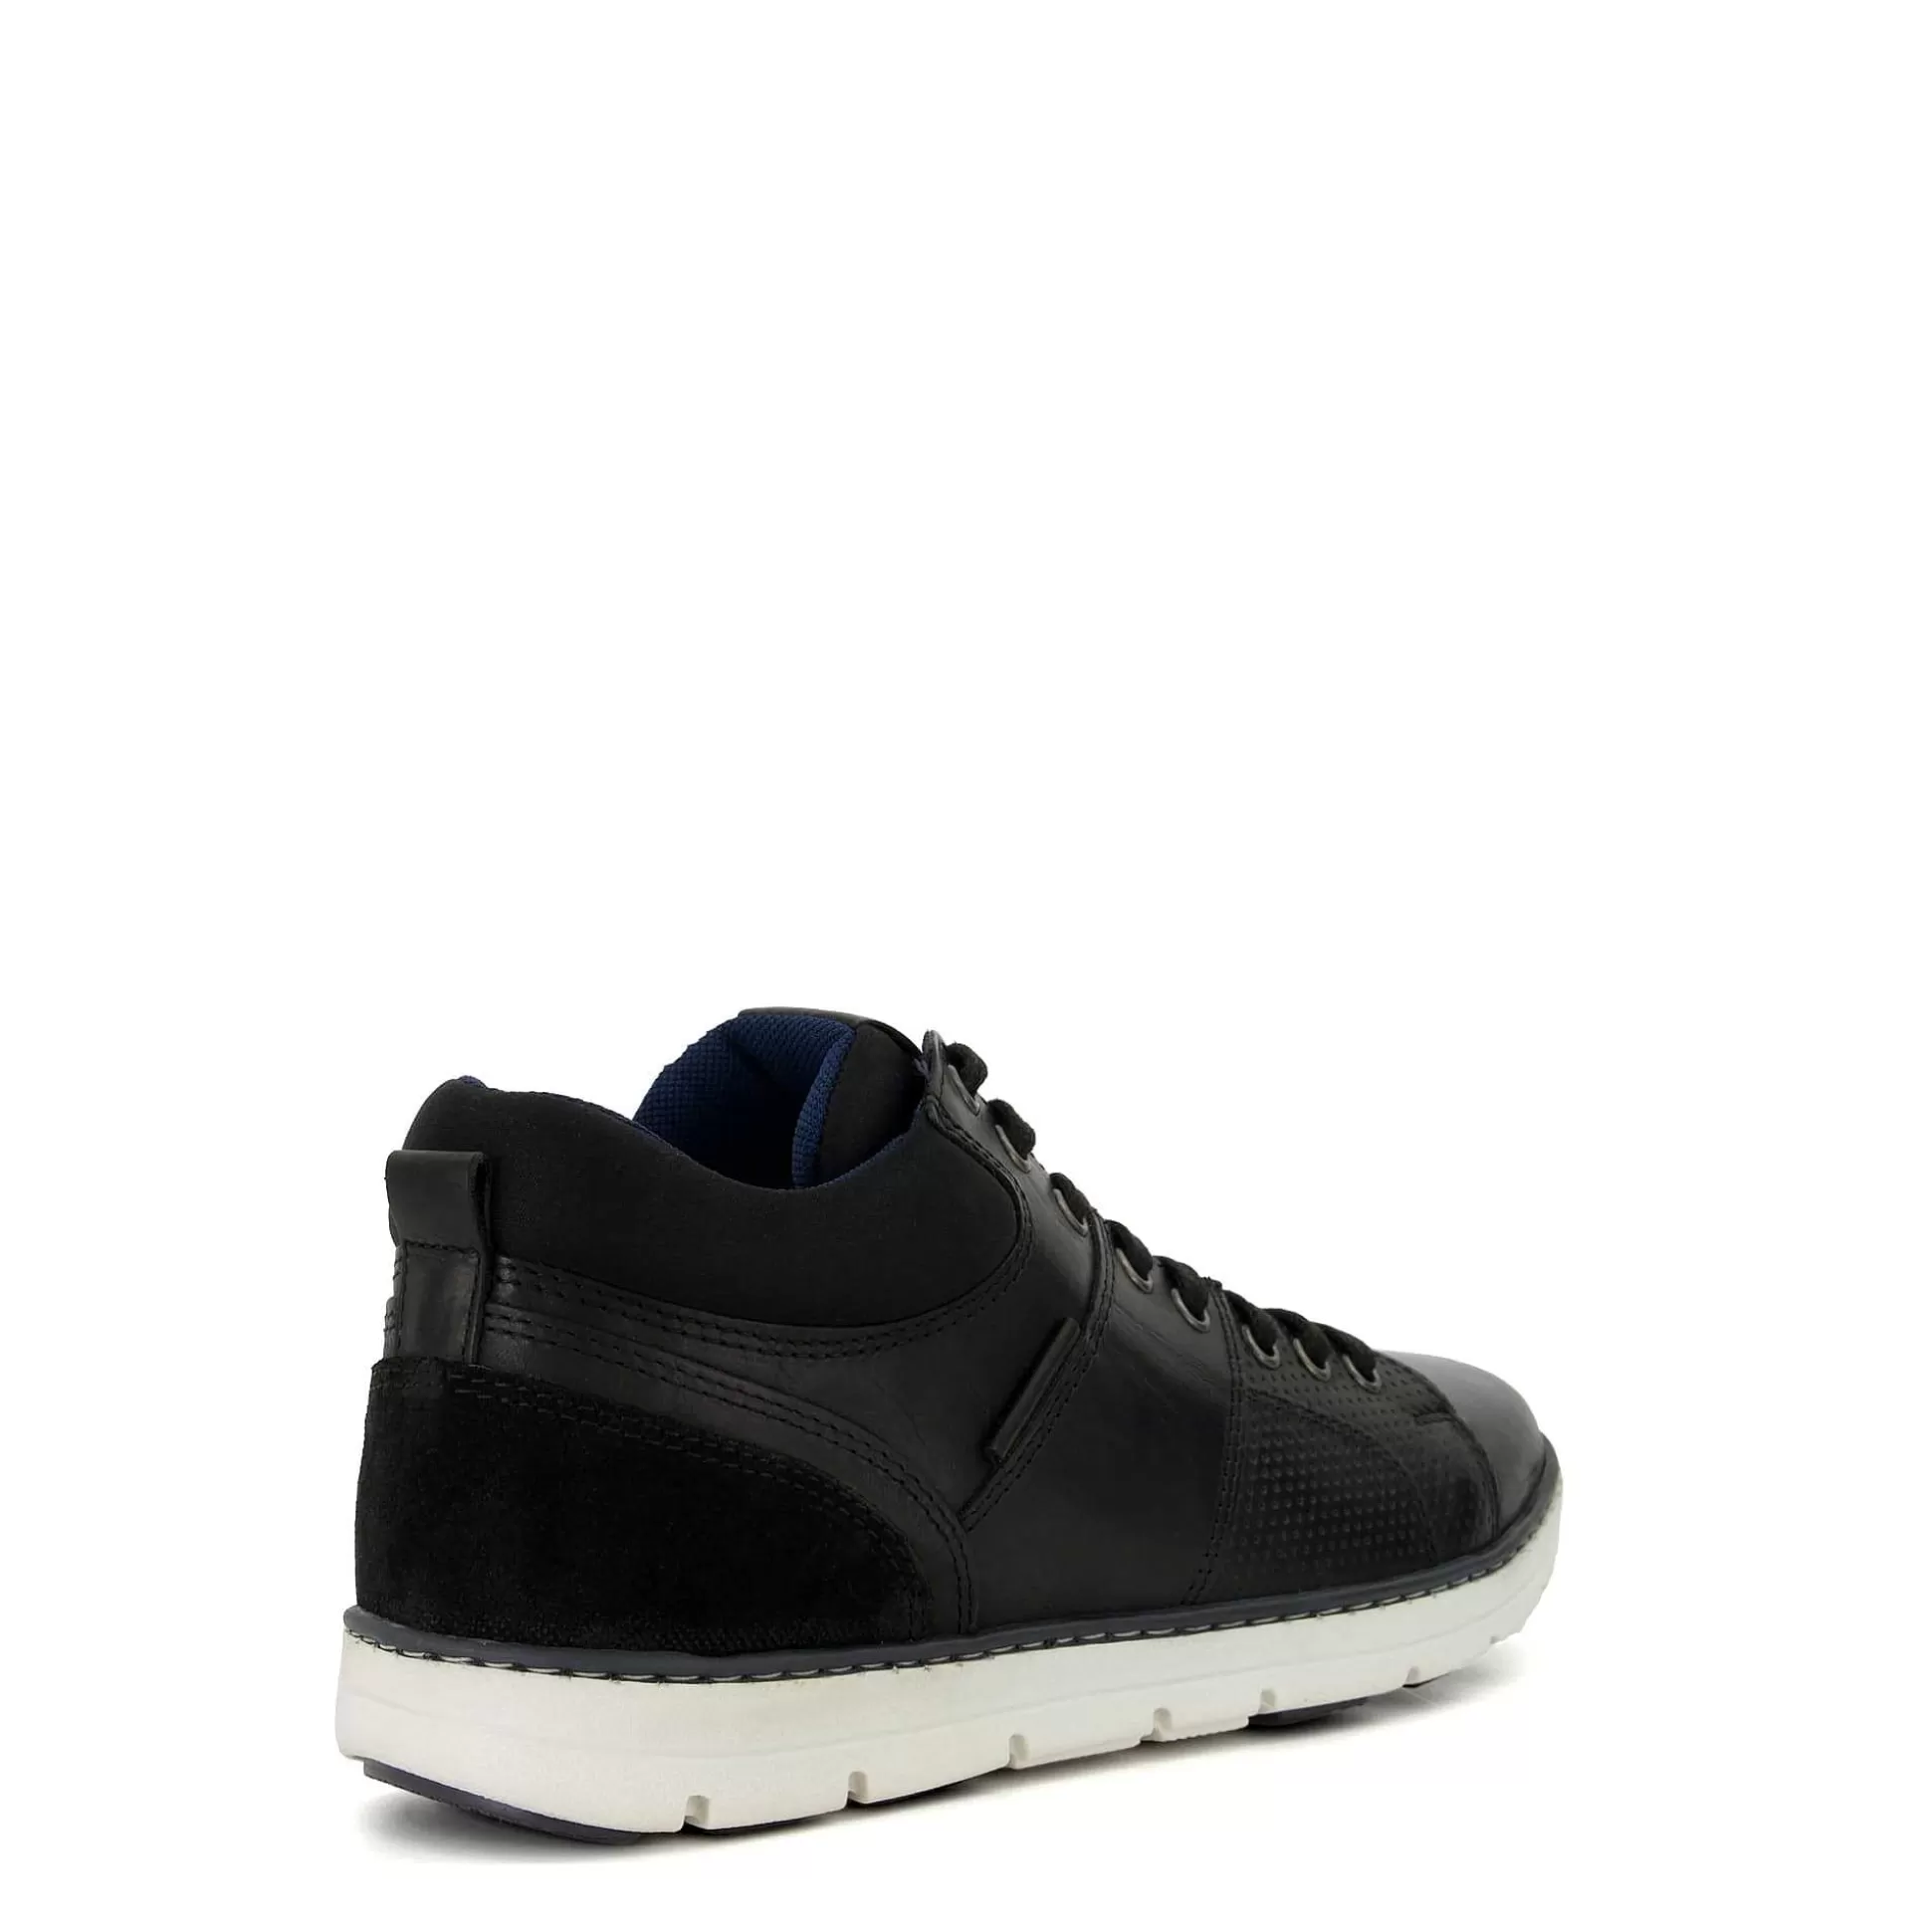 Dune London STATTER - BLACK-Men Casual Shoes | Trainers